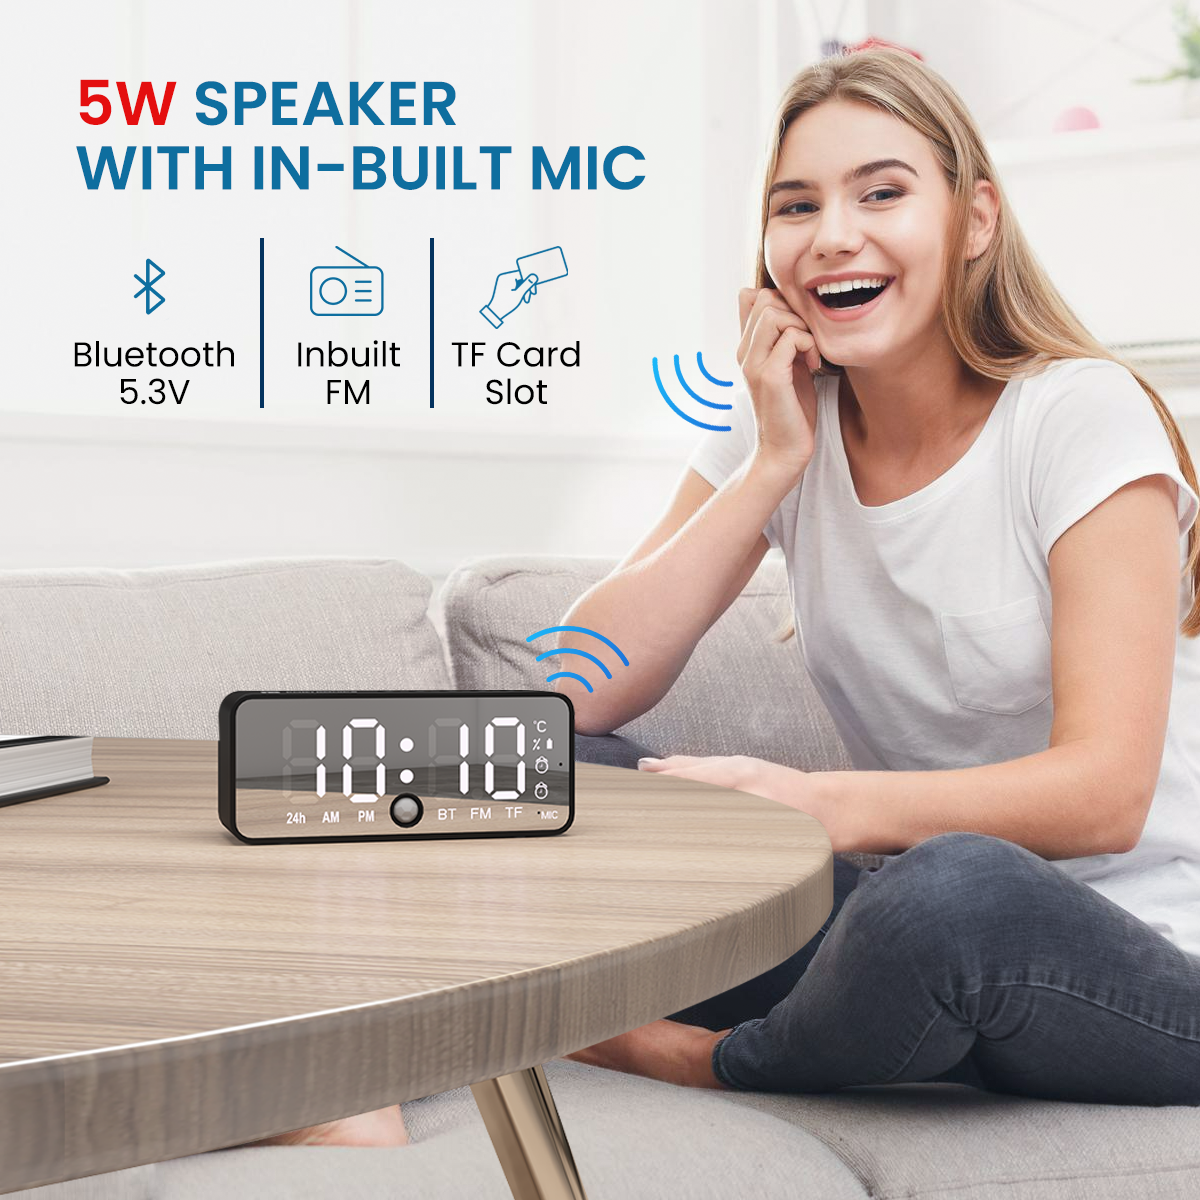 Buy Black Portronics pixel 4 wireless portable speaker comes with 5w speaker with inbuilt mic to make handsfree call